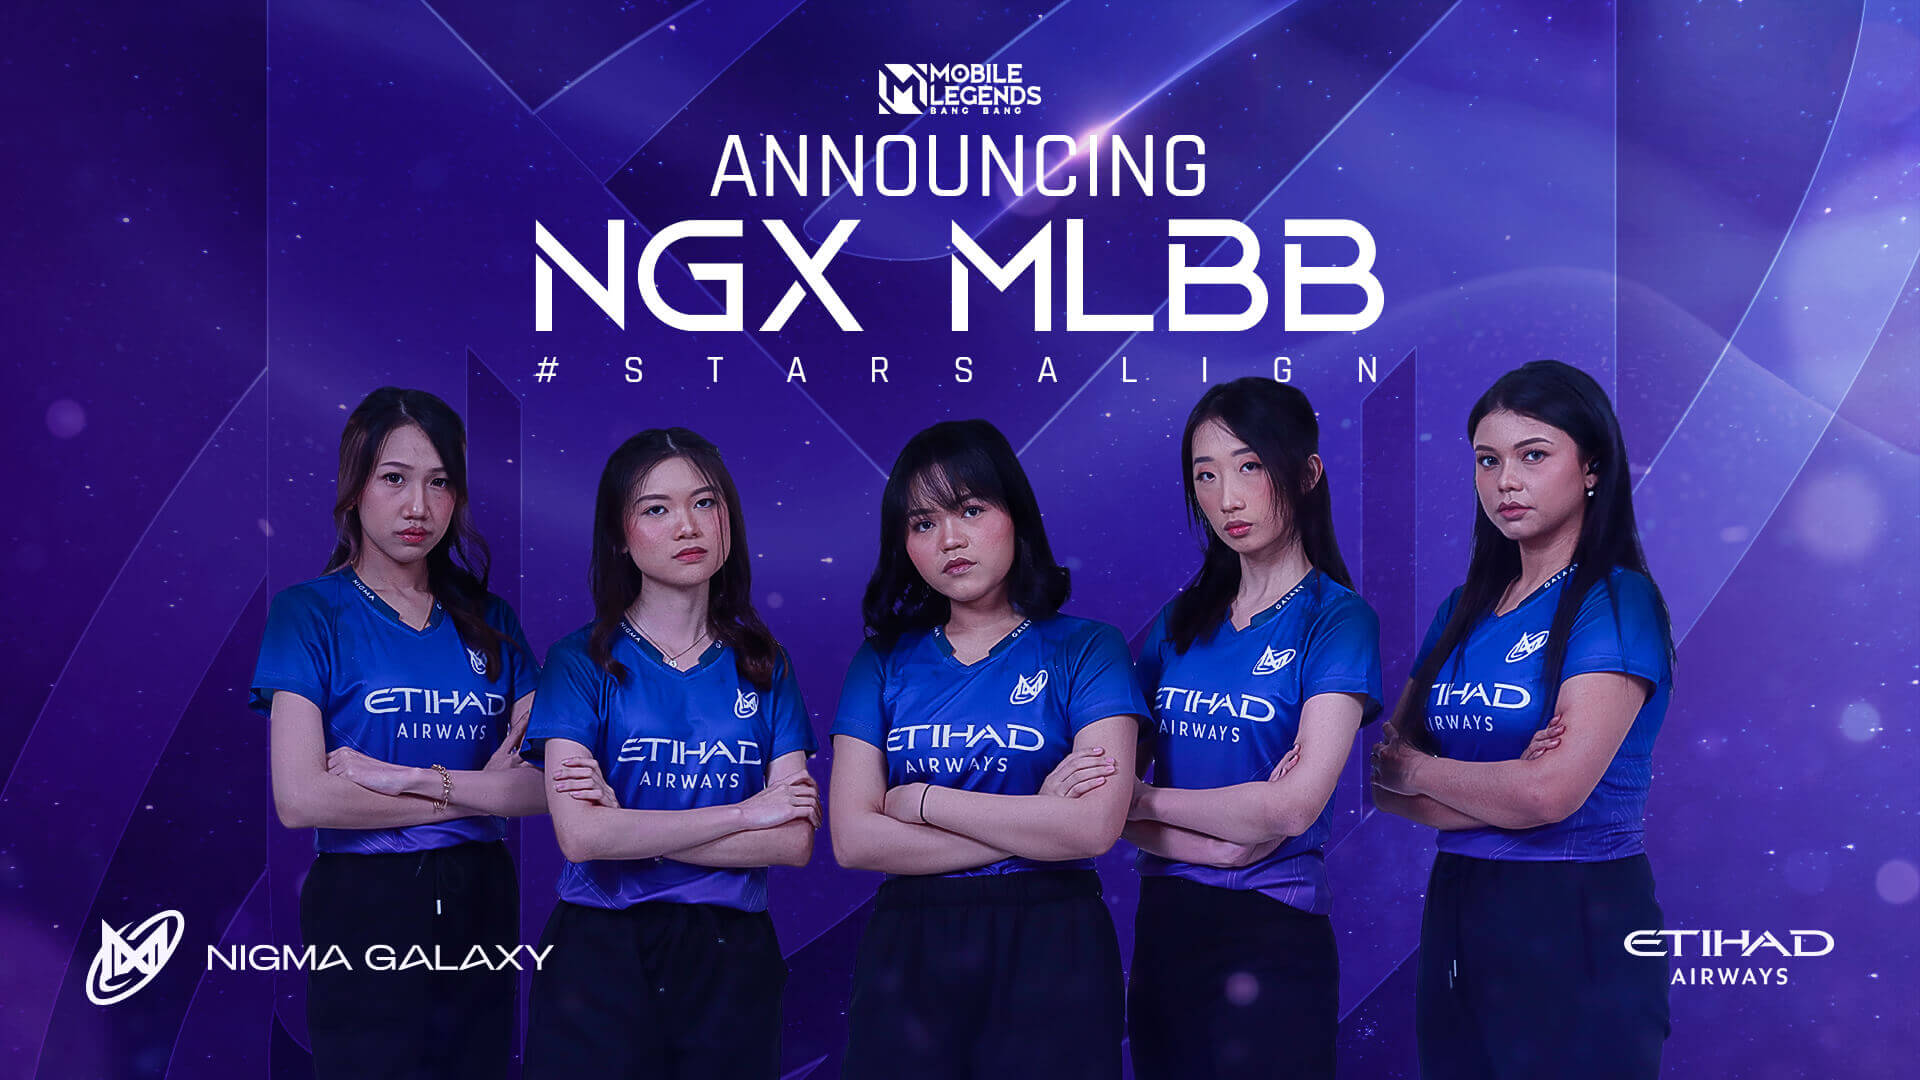 Our NGX family continues to grow: Today we are happy to announce our Mobile Legends Bang Bang team. This marks our first steps in MLBB and the beginning of our expansion to Indonesia.